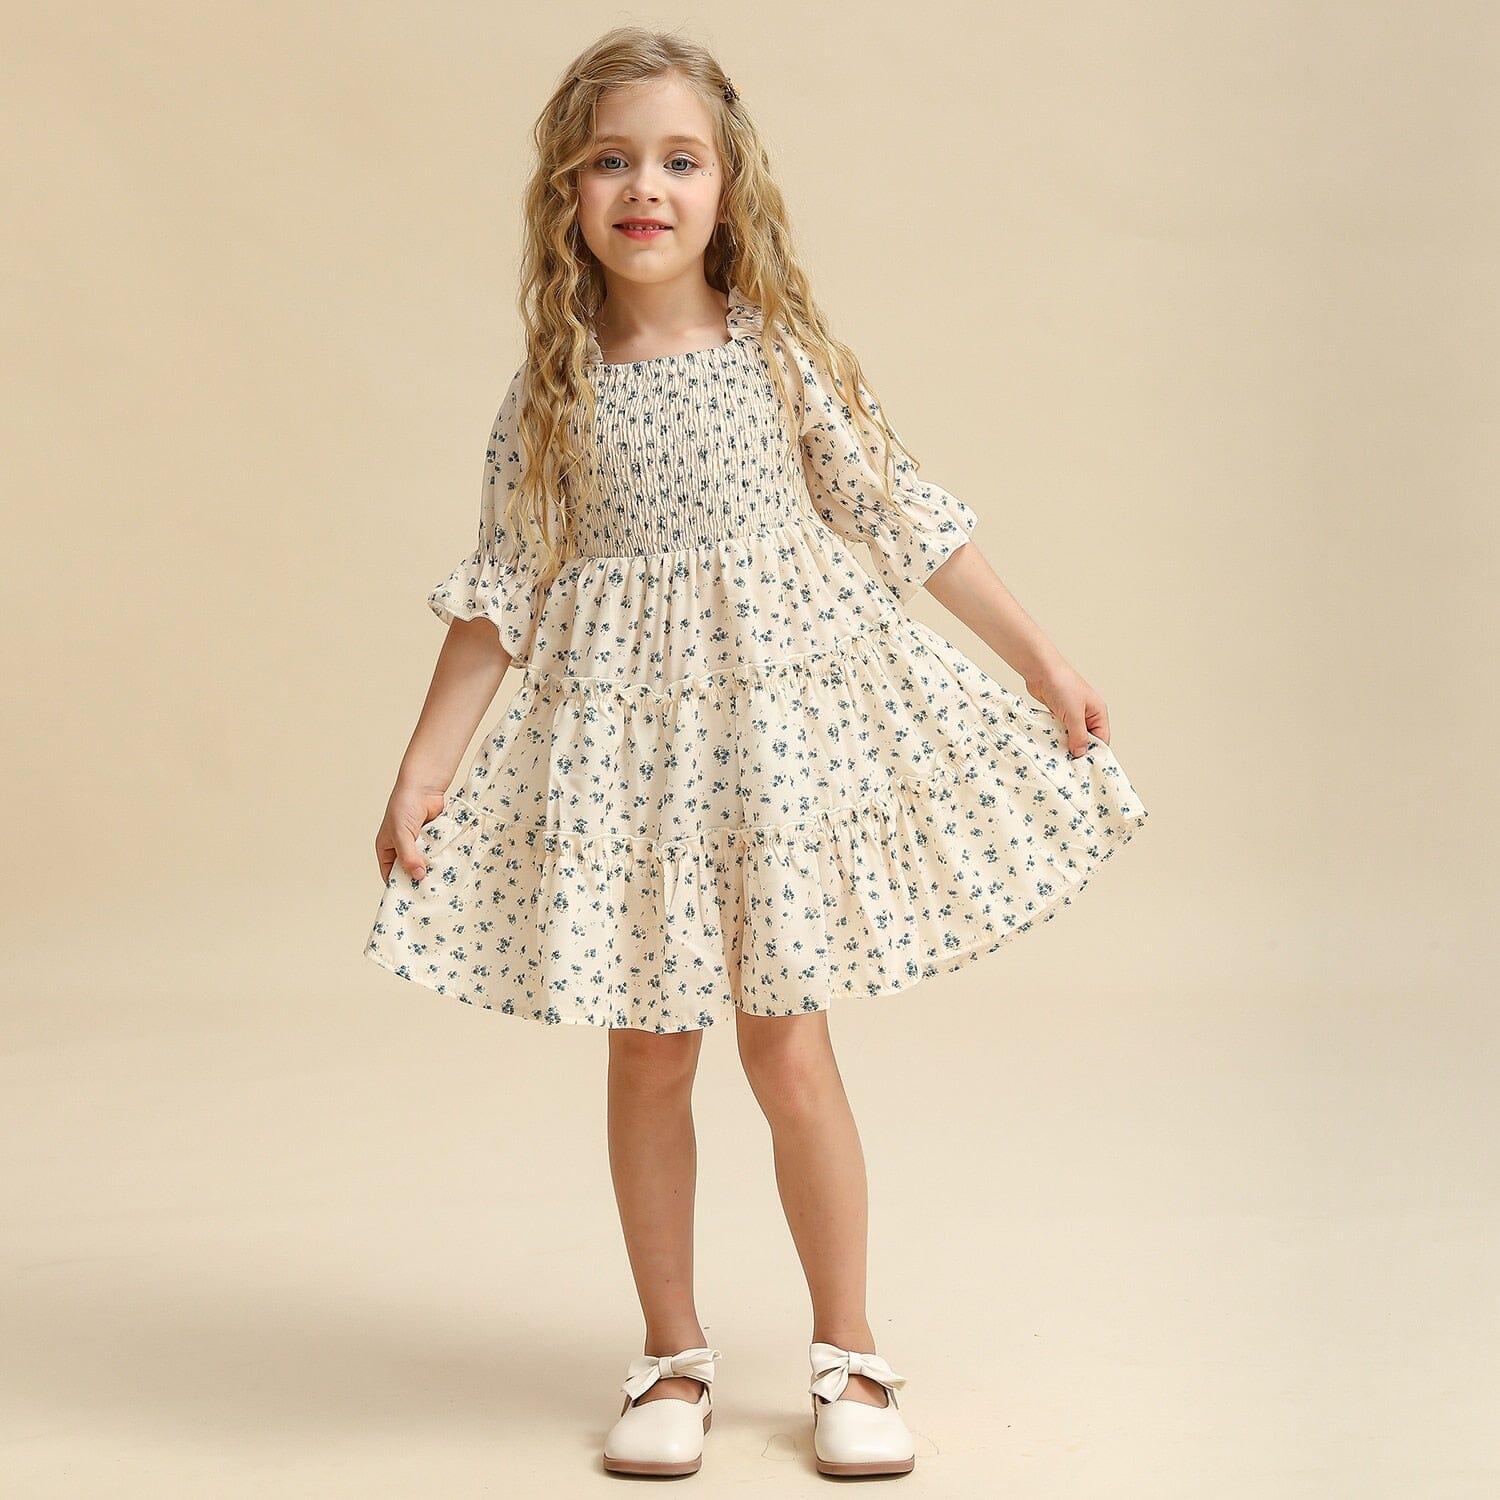 Full Sleeve French Style Dresses for Children Baby & Toddler Dresses Fashionjosie 